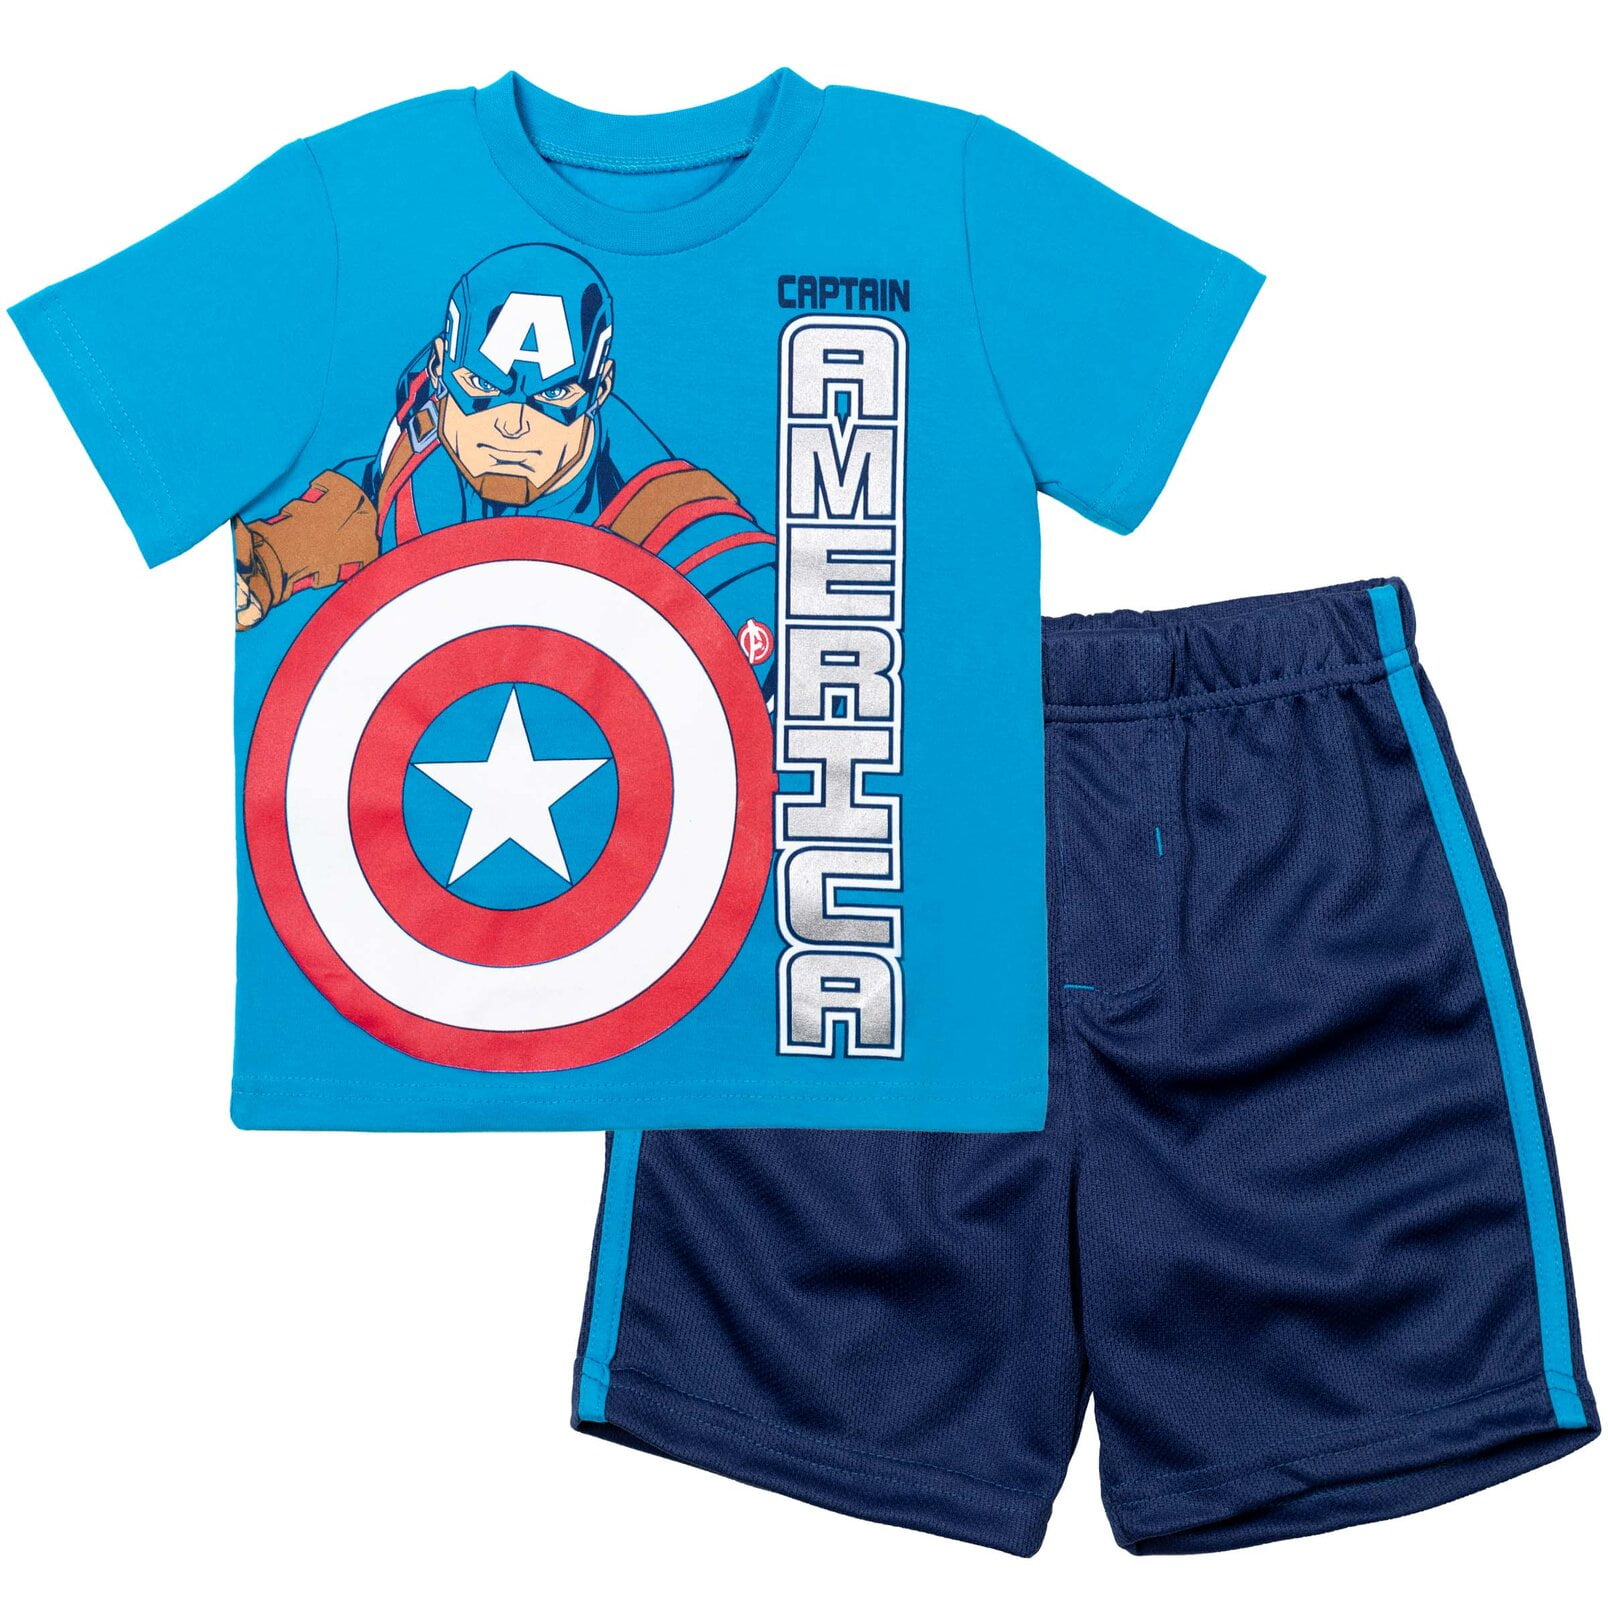 Kid America Boys Outfit and Toddler Set Big Avengers T-Shirt Captain to MeshShorts Marvel Toddler